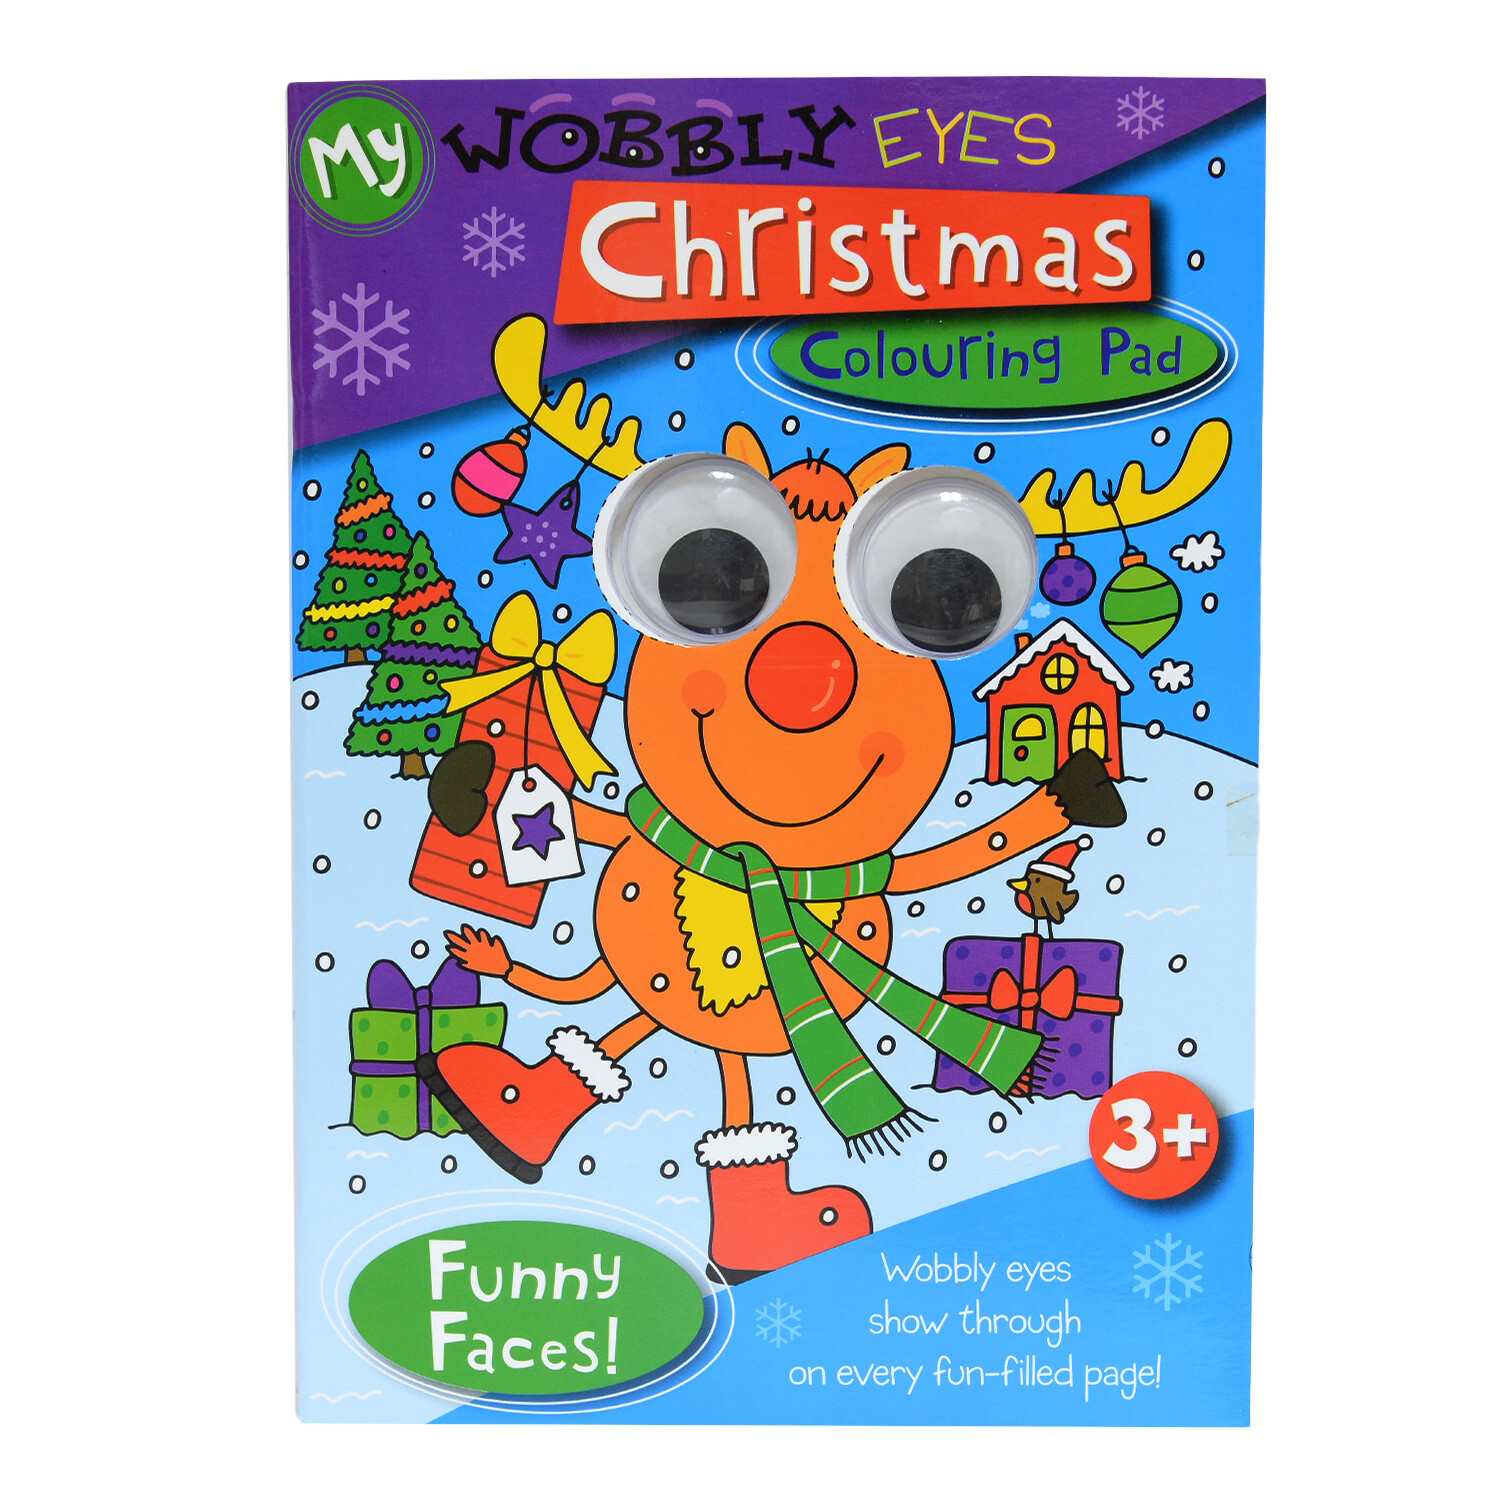 Wobbly Eyes Christmas Colouring Book Image